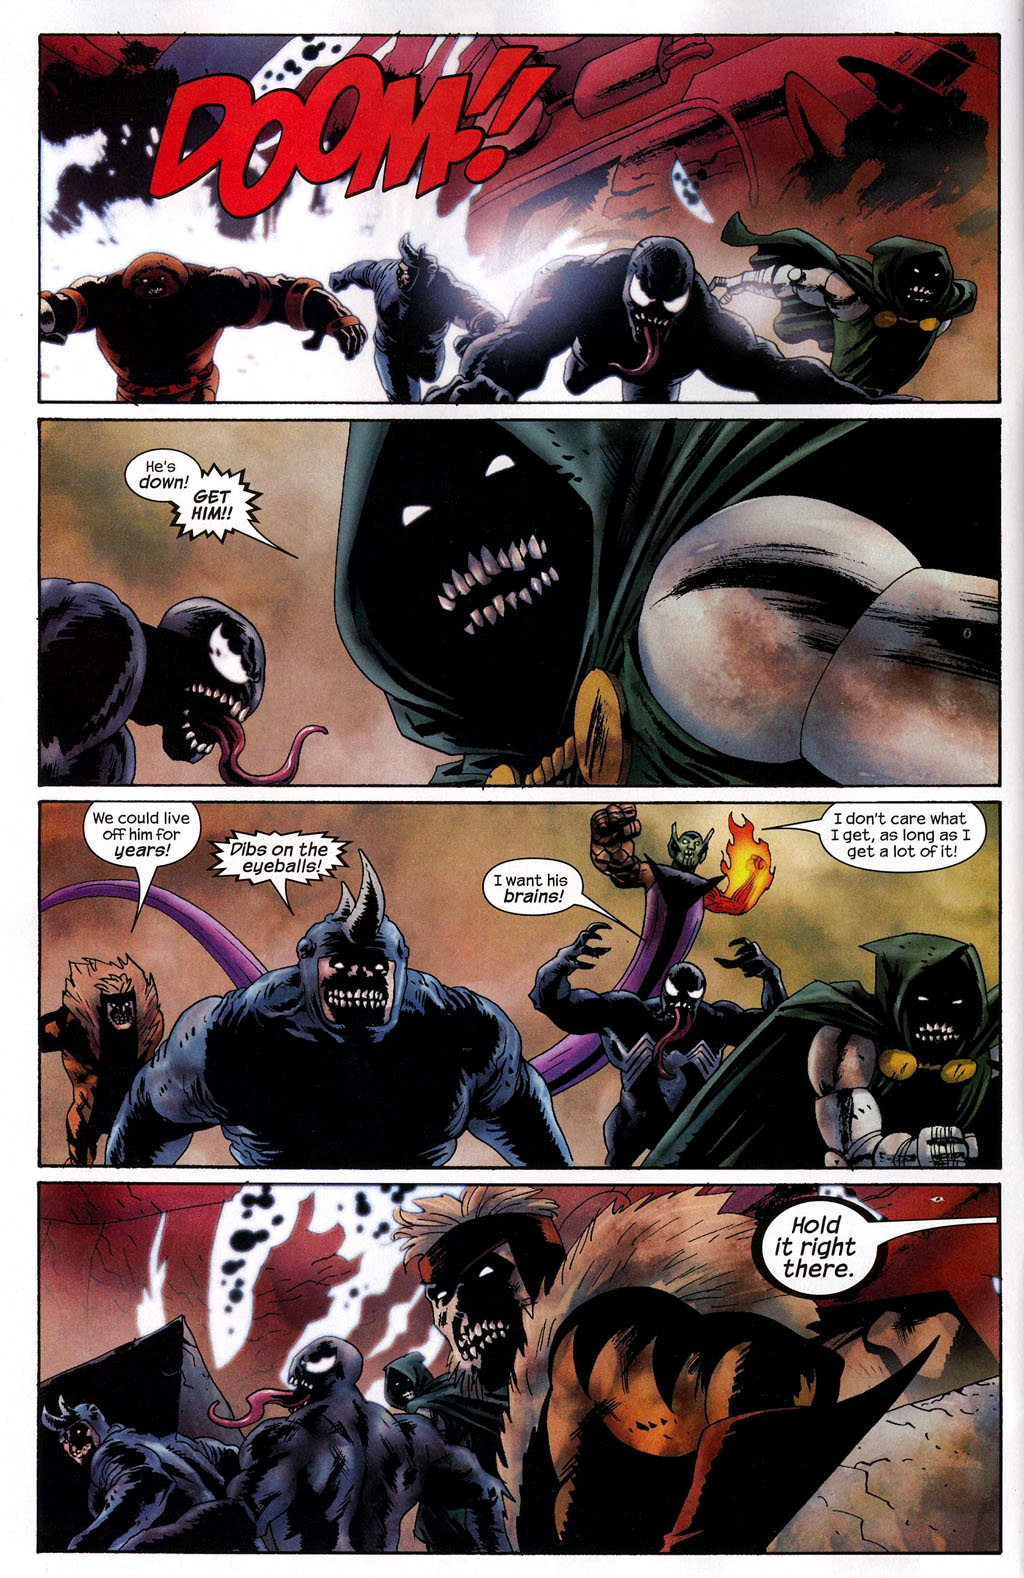 Marvel Zombies 1. Part 5 of 5